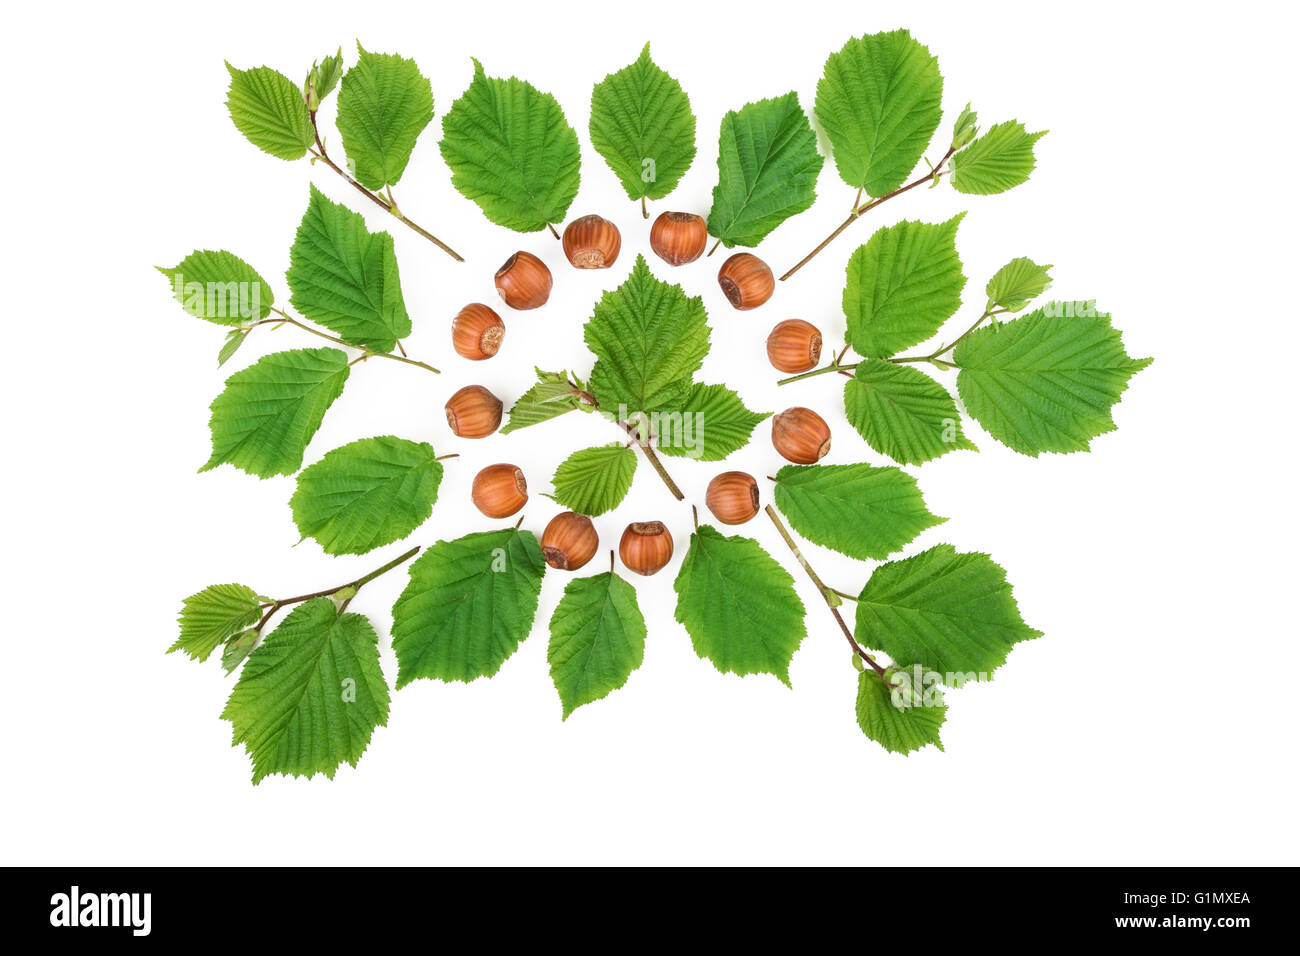 Filbert nuts with green leaves bright pattern on white. Flat lay, top view. Stock Photo